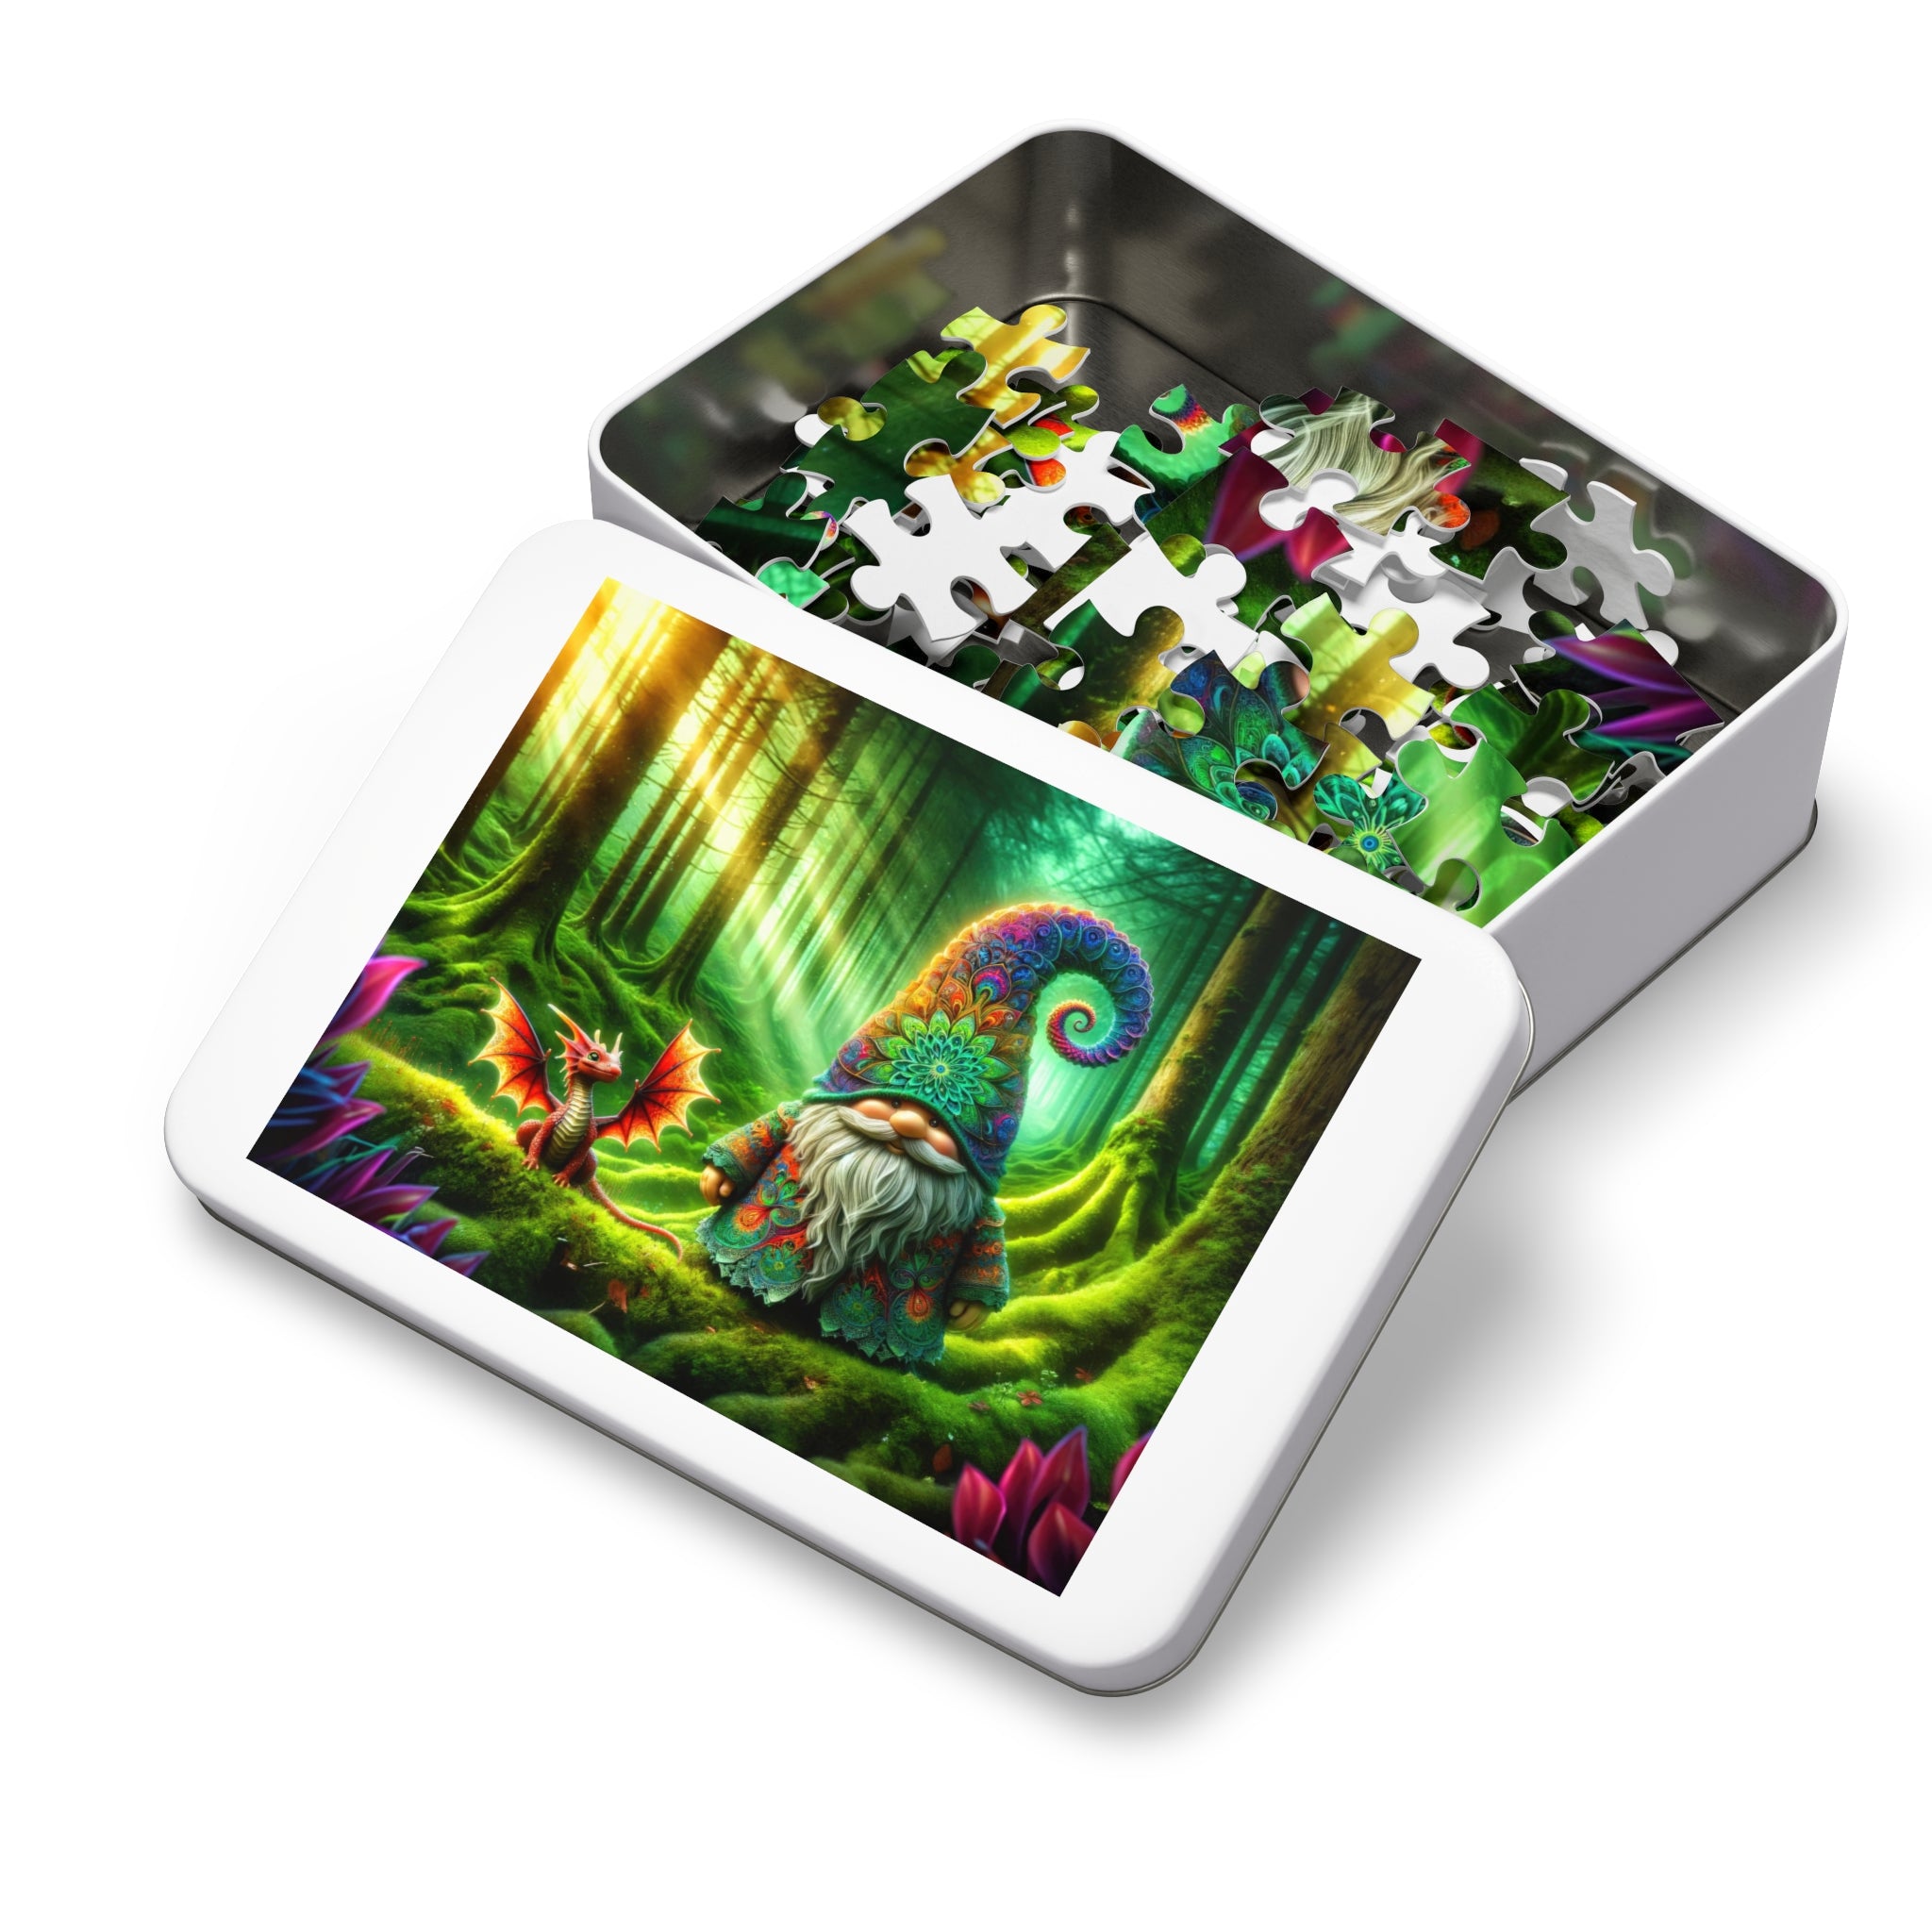 The Gnome's Enchanted Morn Jigsaw Puzzle